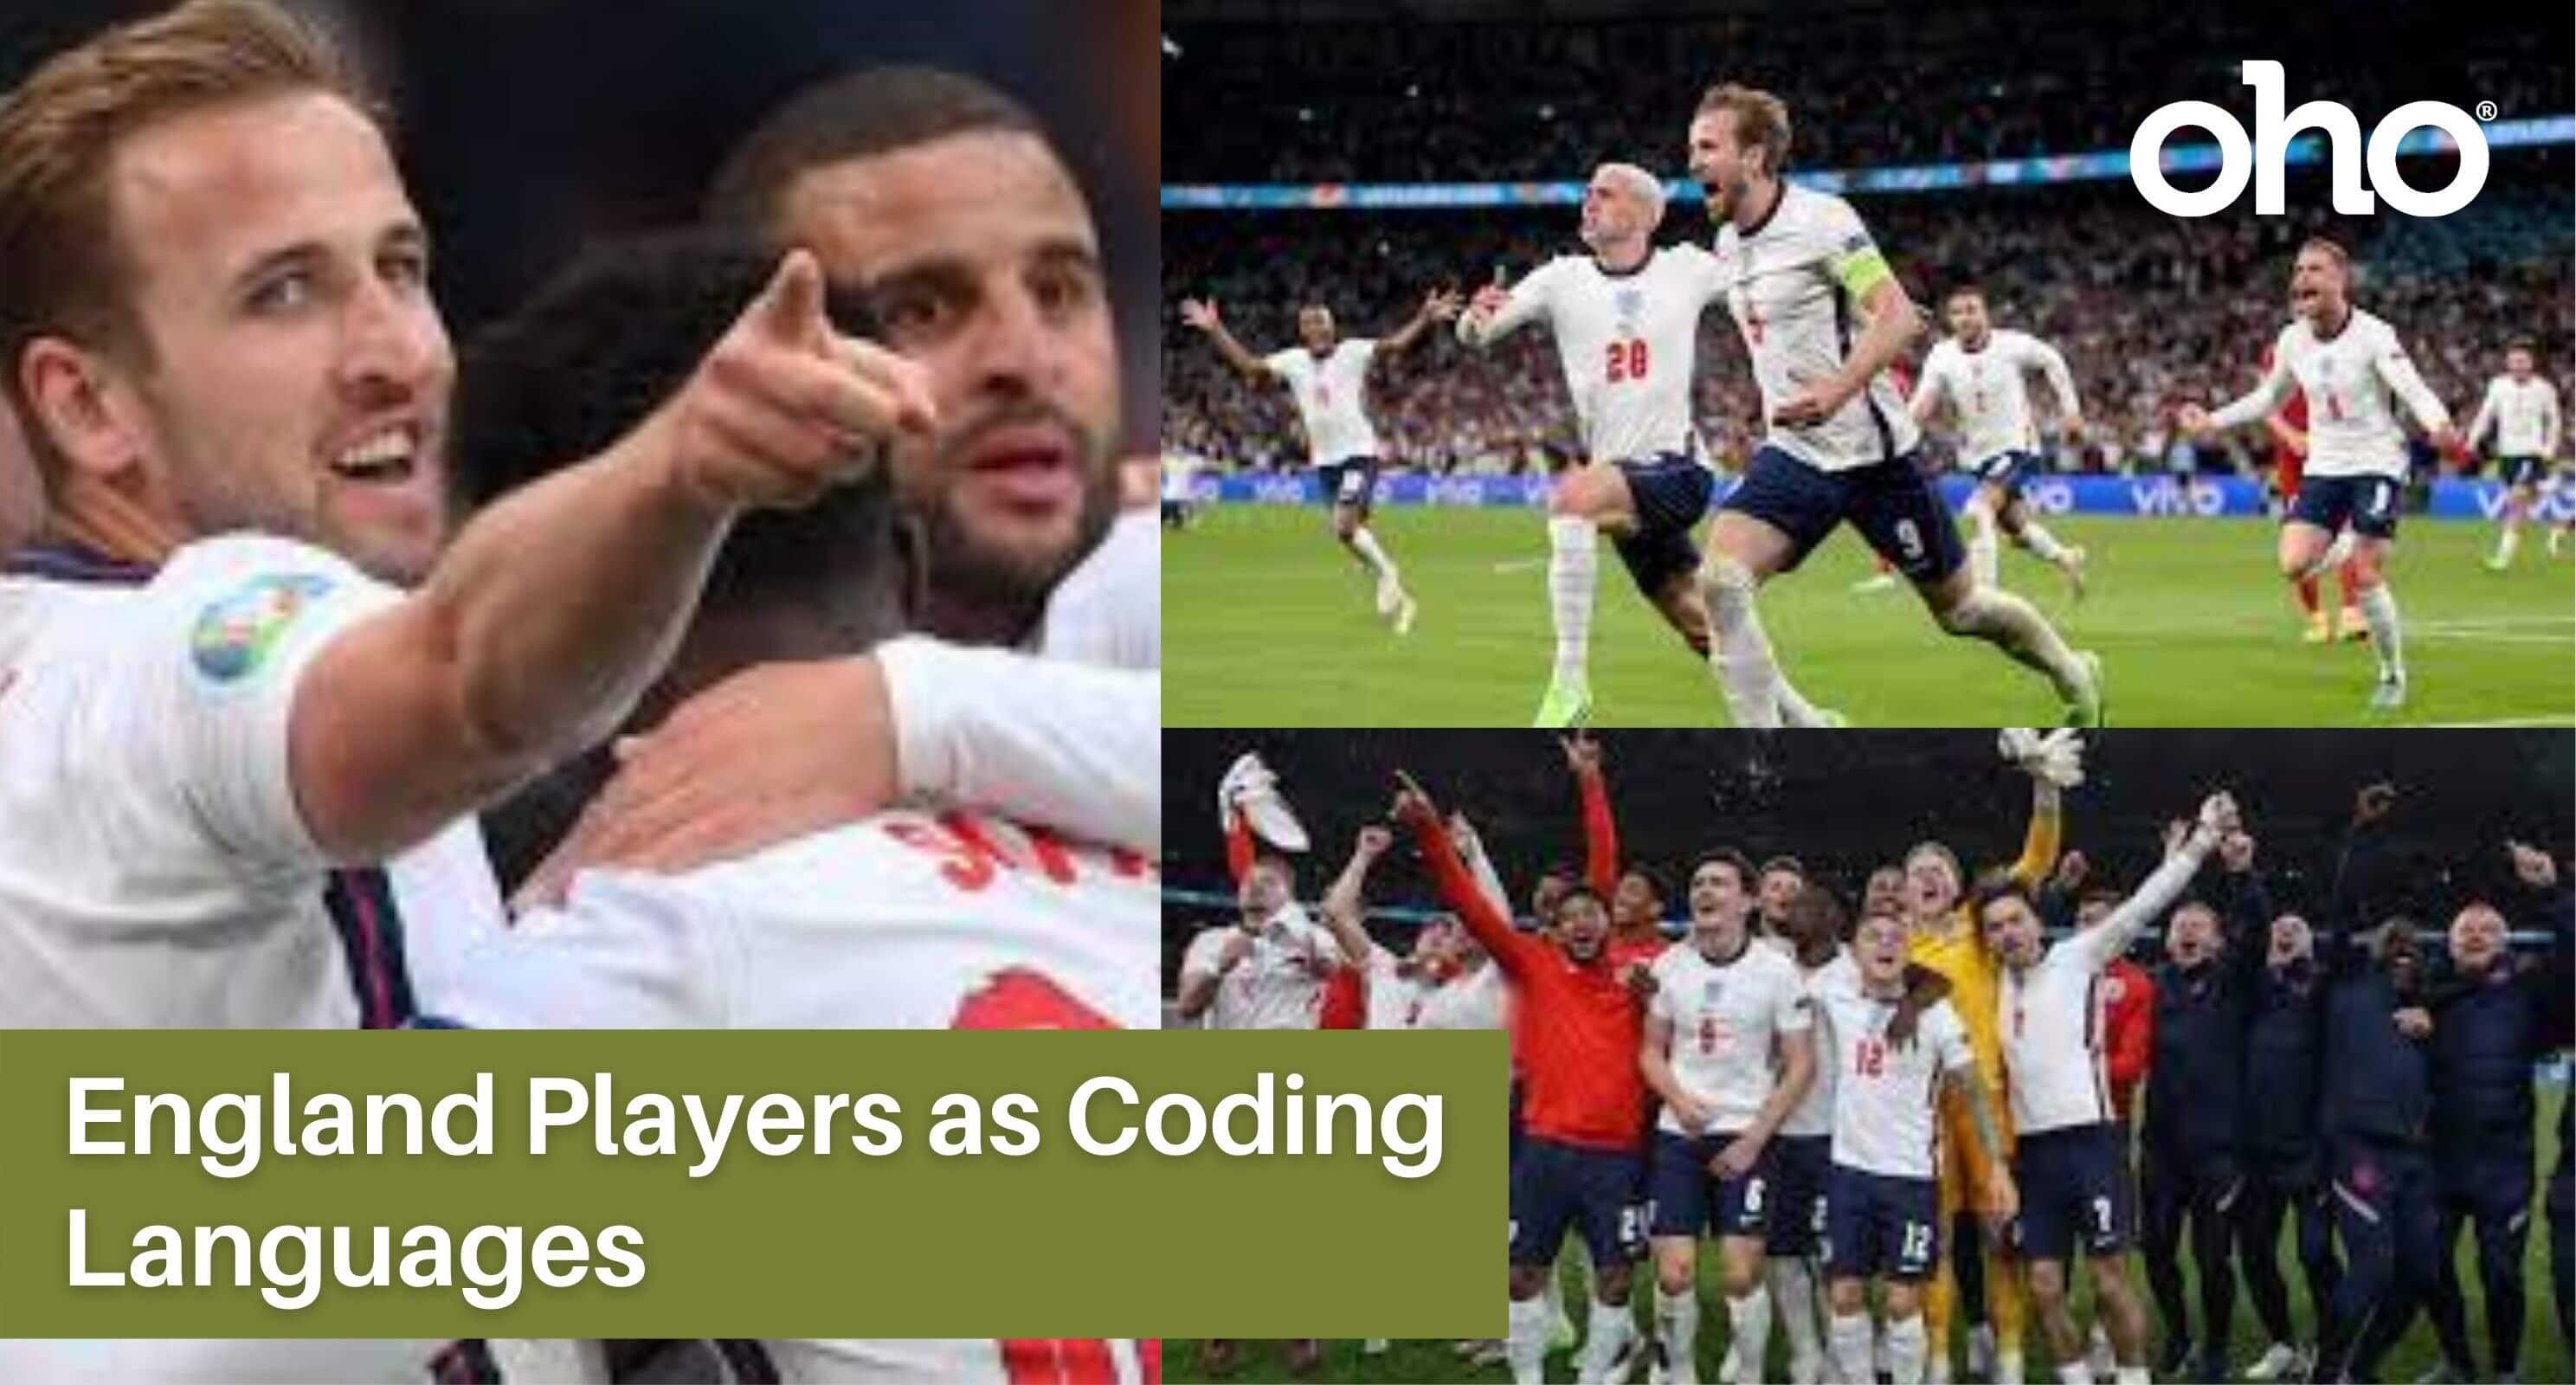 England players as coding languages